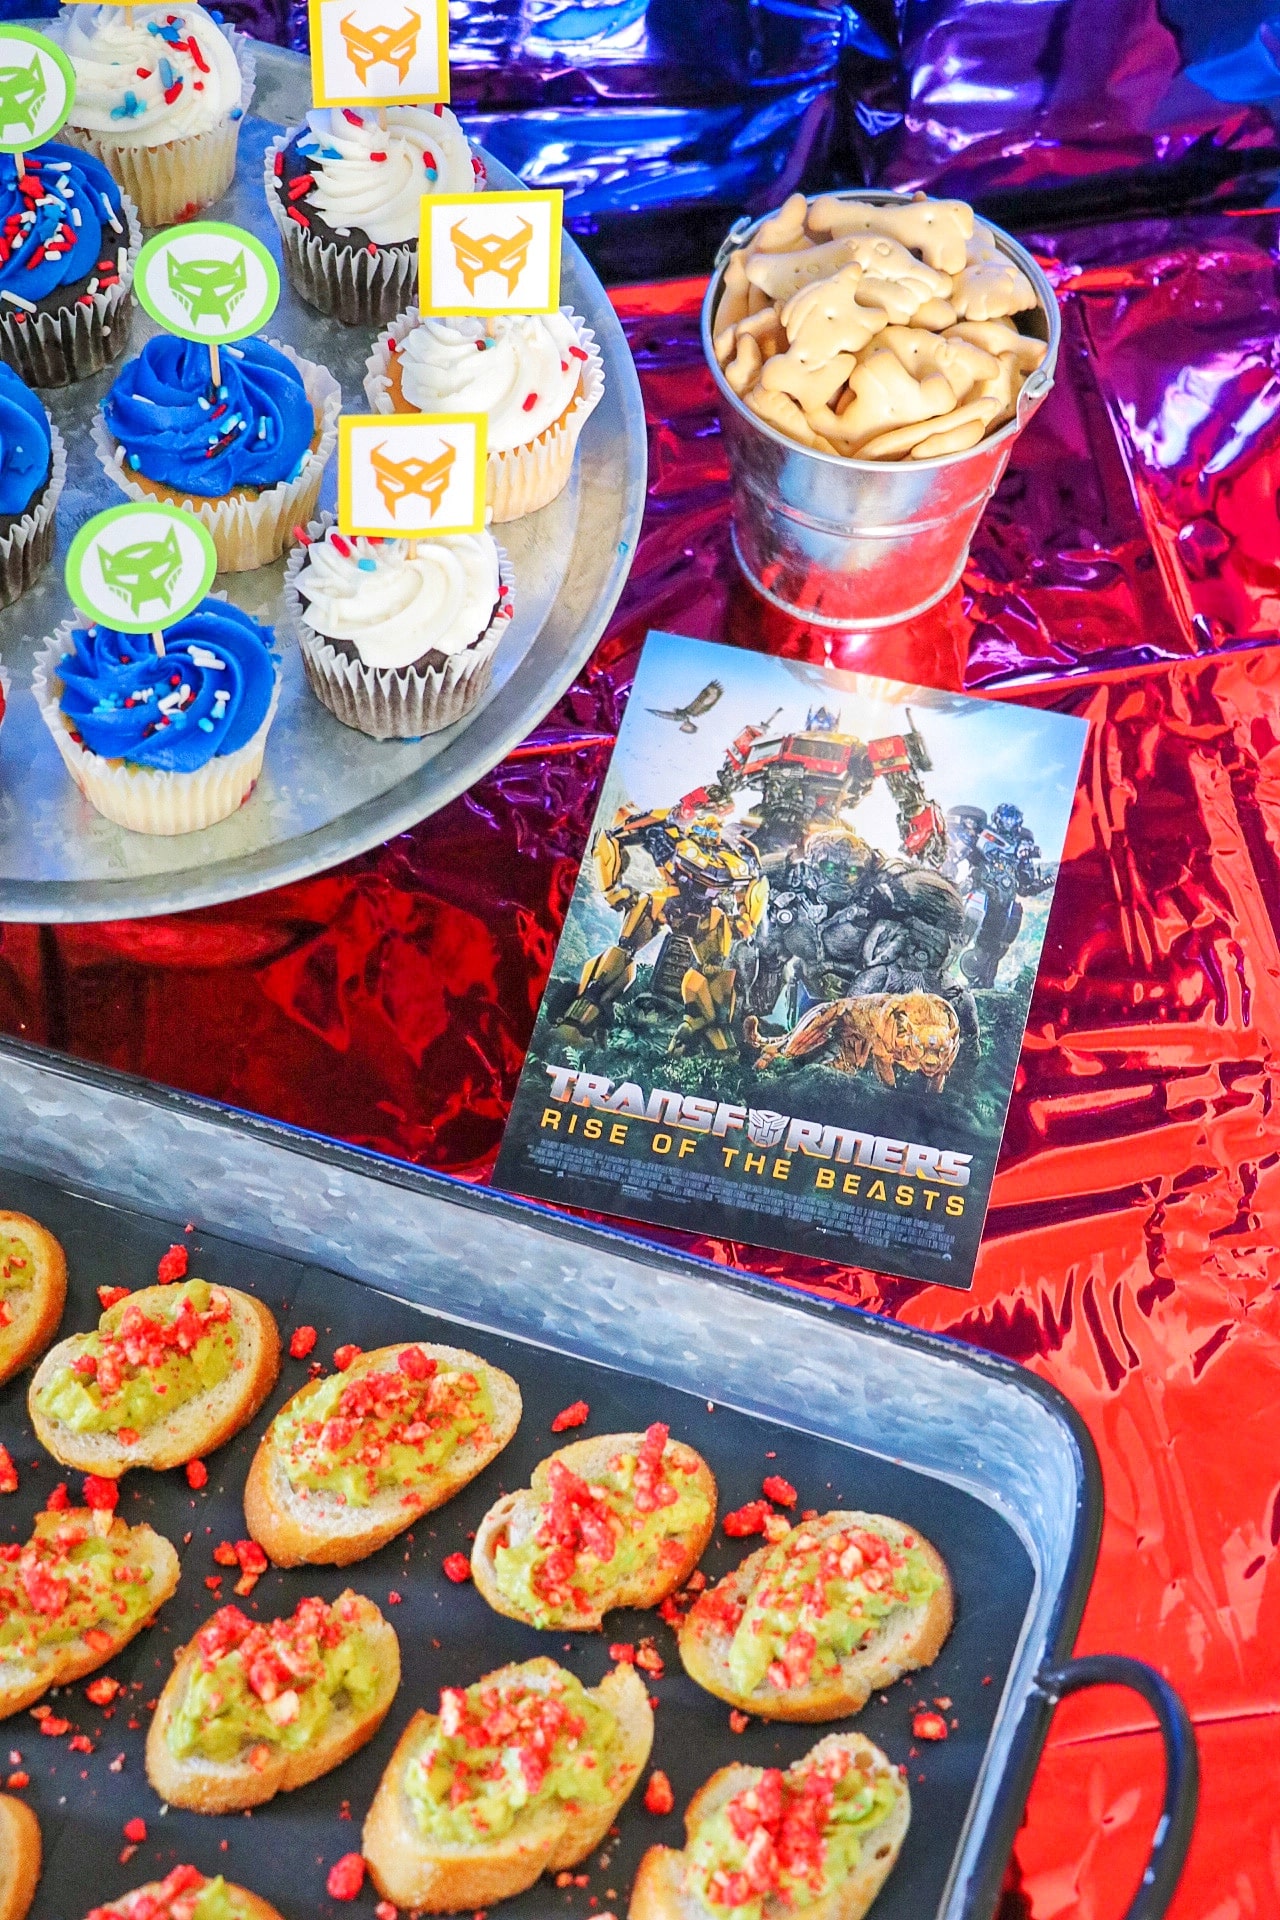 TRANSFORMERS: RISE OF THE BEASTS At-Home Watch Party (Transformers themed party)